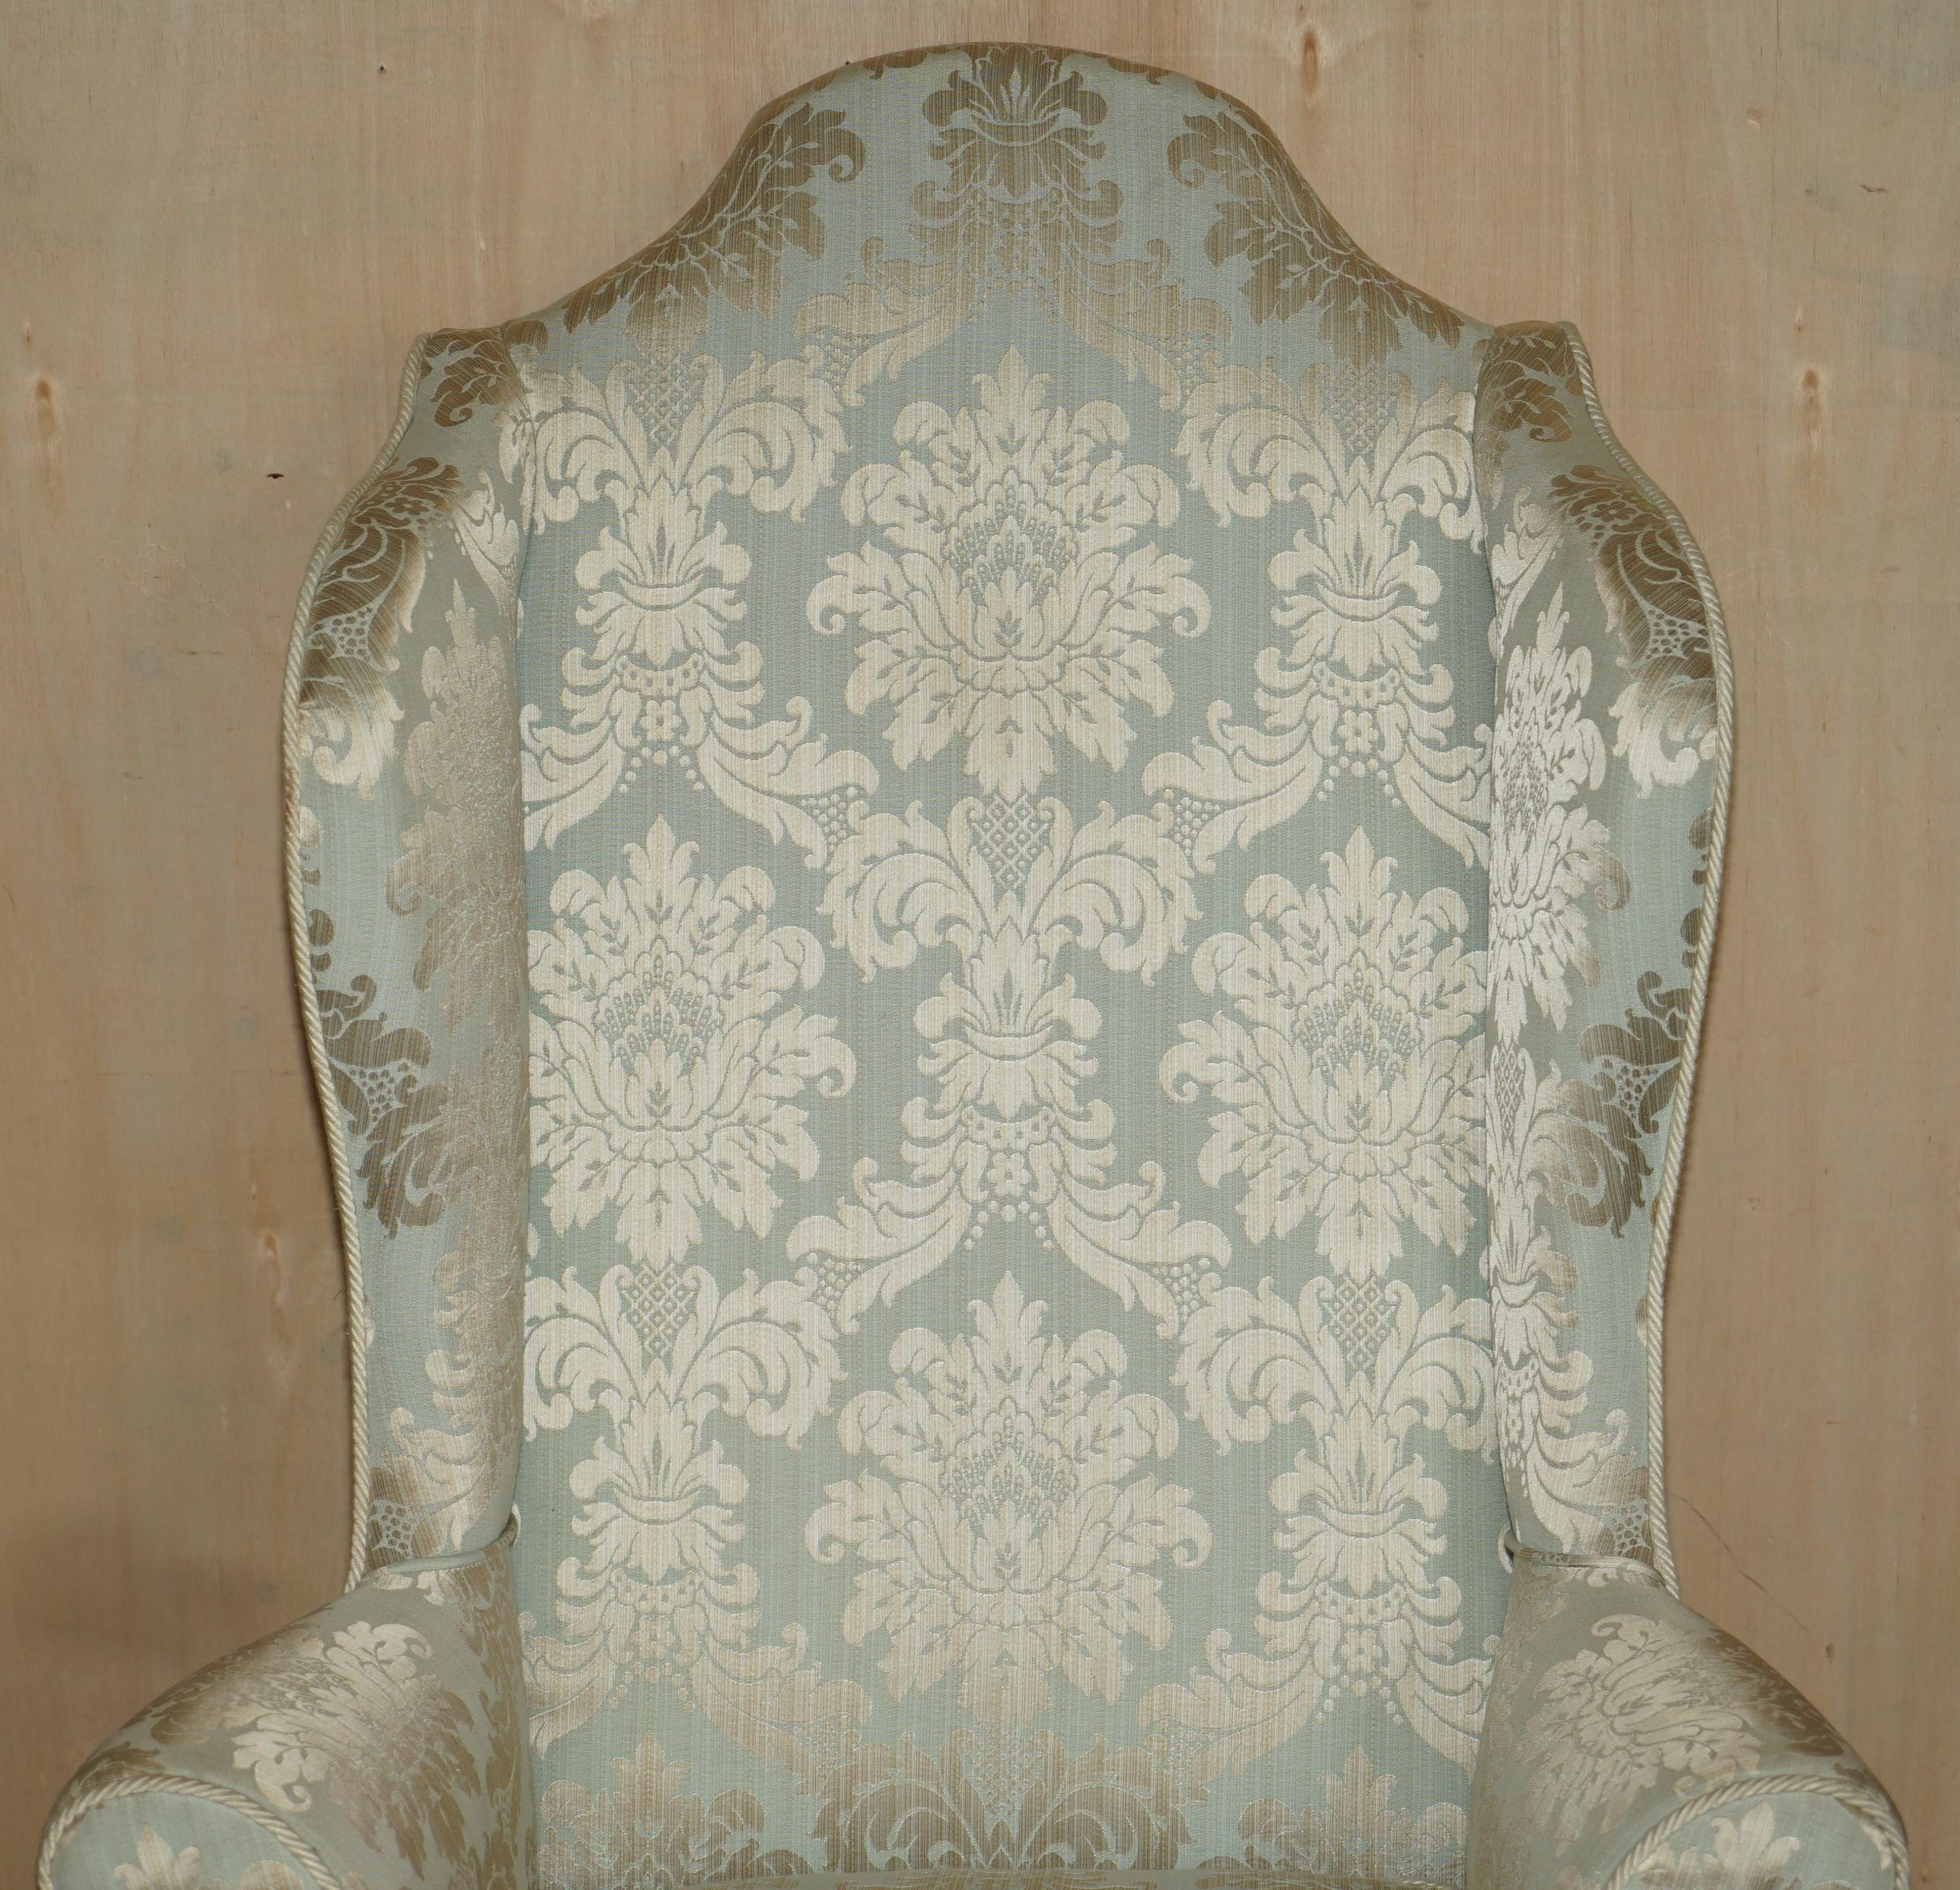 large wingback armchair